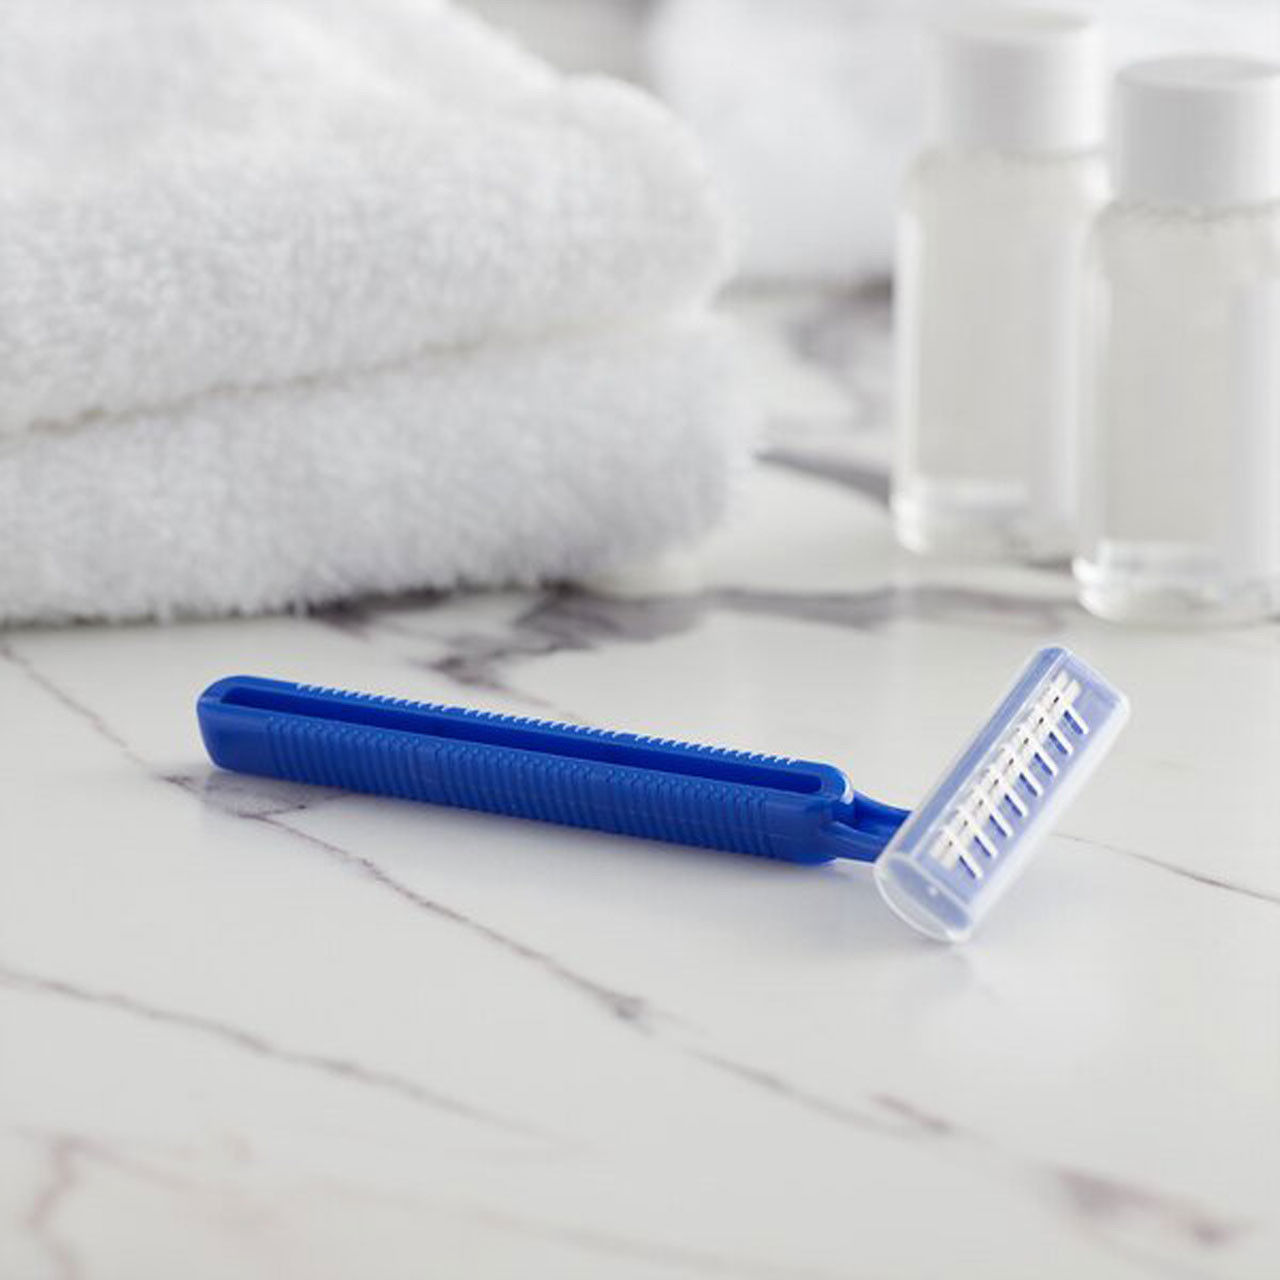 Are these bulk disposable razors suitable for hotel use?